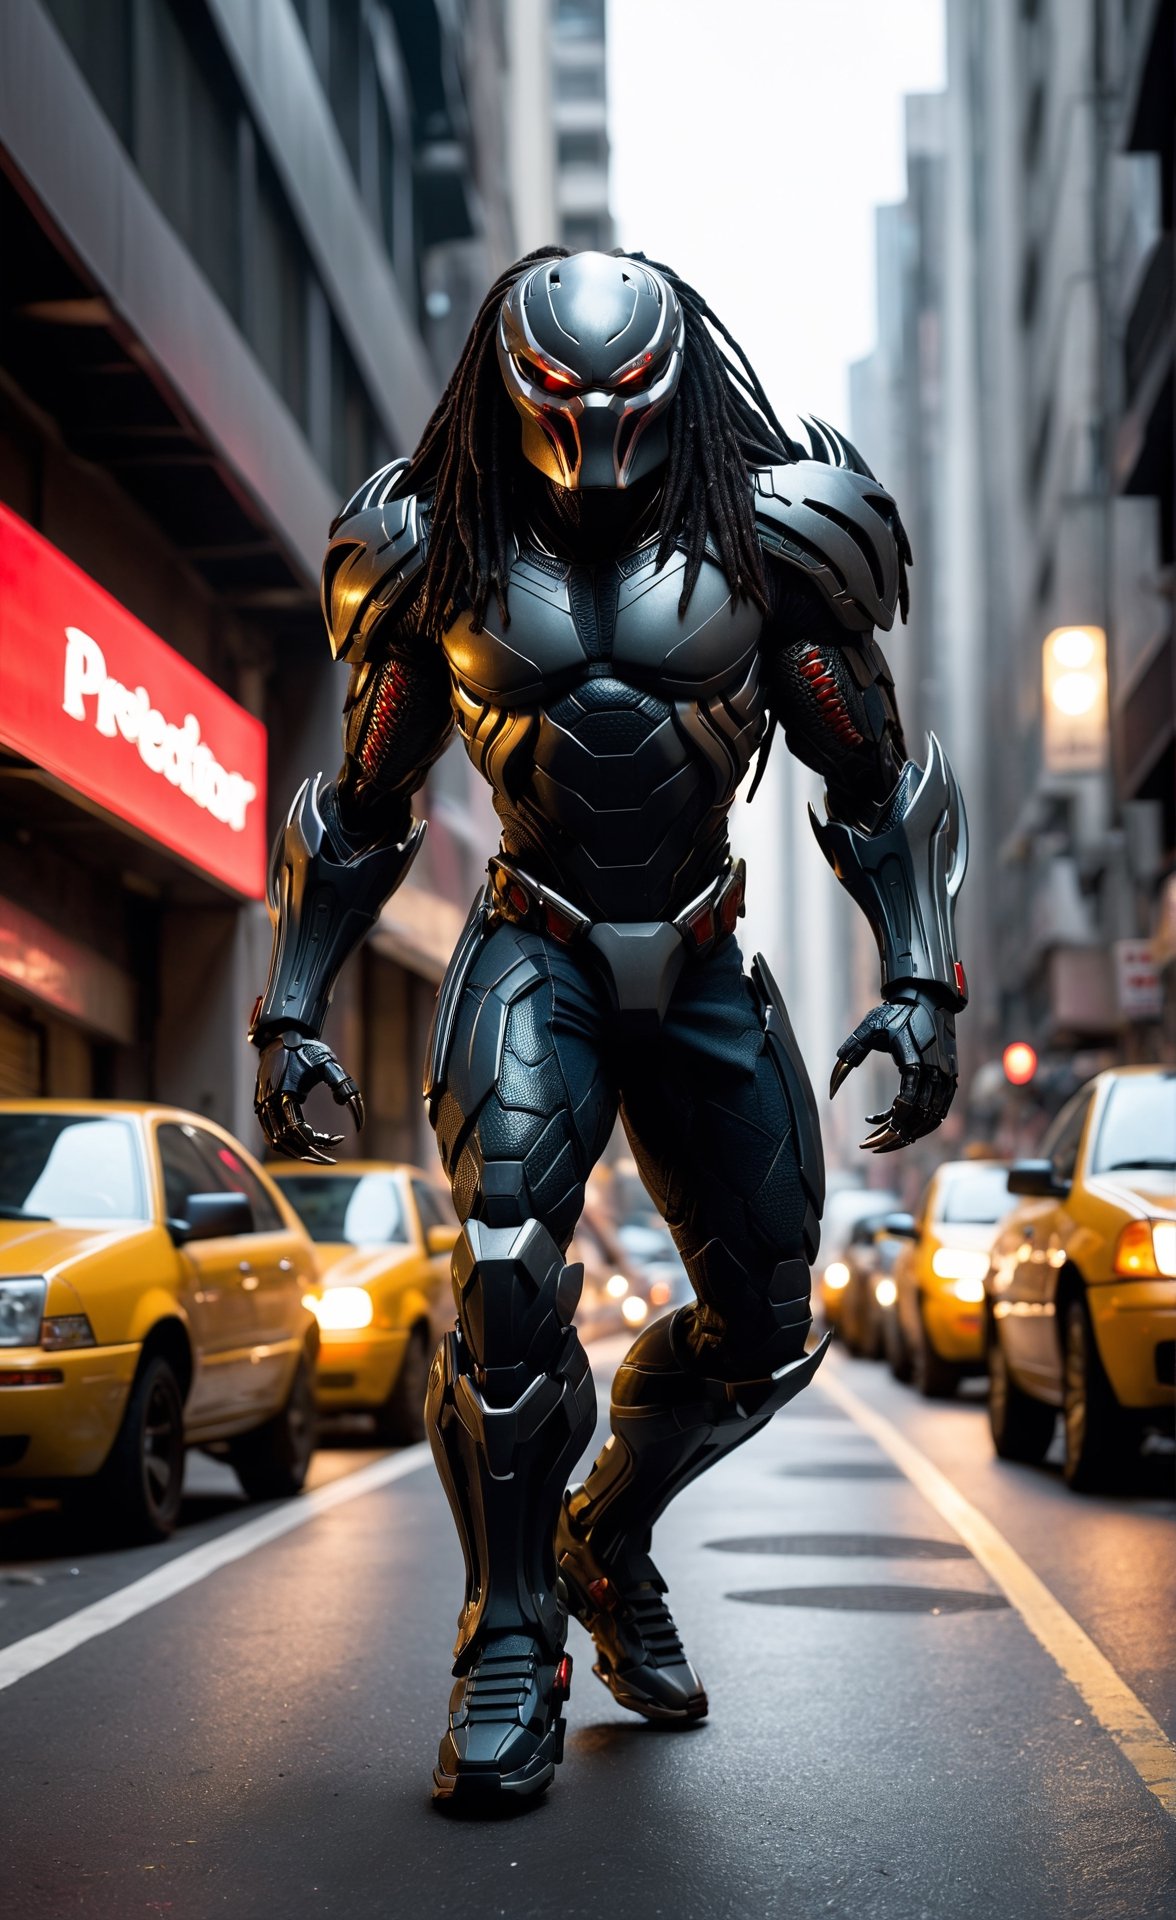 Despite the chaotic energy of the city surrounding it, the predator navigates the labyrinthine streets with ease, its senses honed to a razor-sharp edge as it tracks its prey through the urban sprawl. With each silent step, it blends effortlessly into the throngs of pedestrians, its presence unnoticed amidst the hustle and bustle of city life.